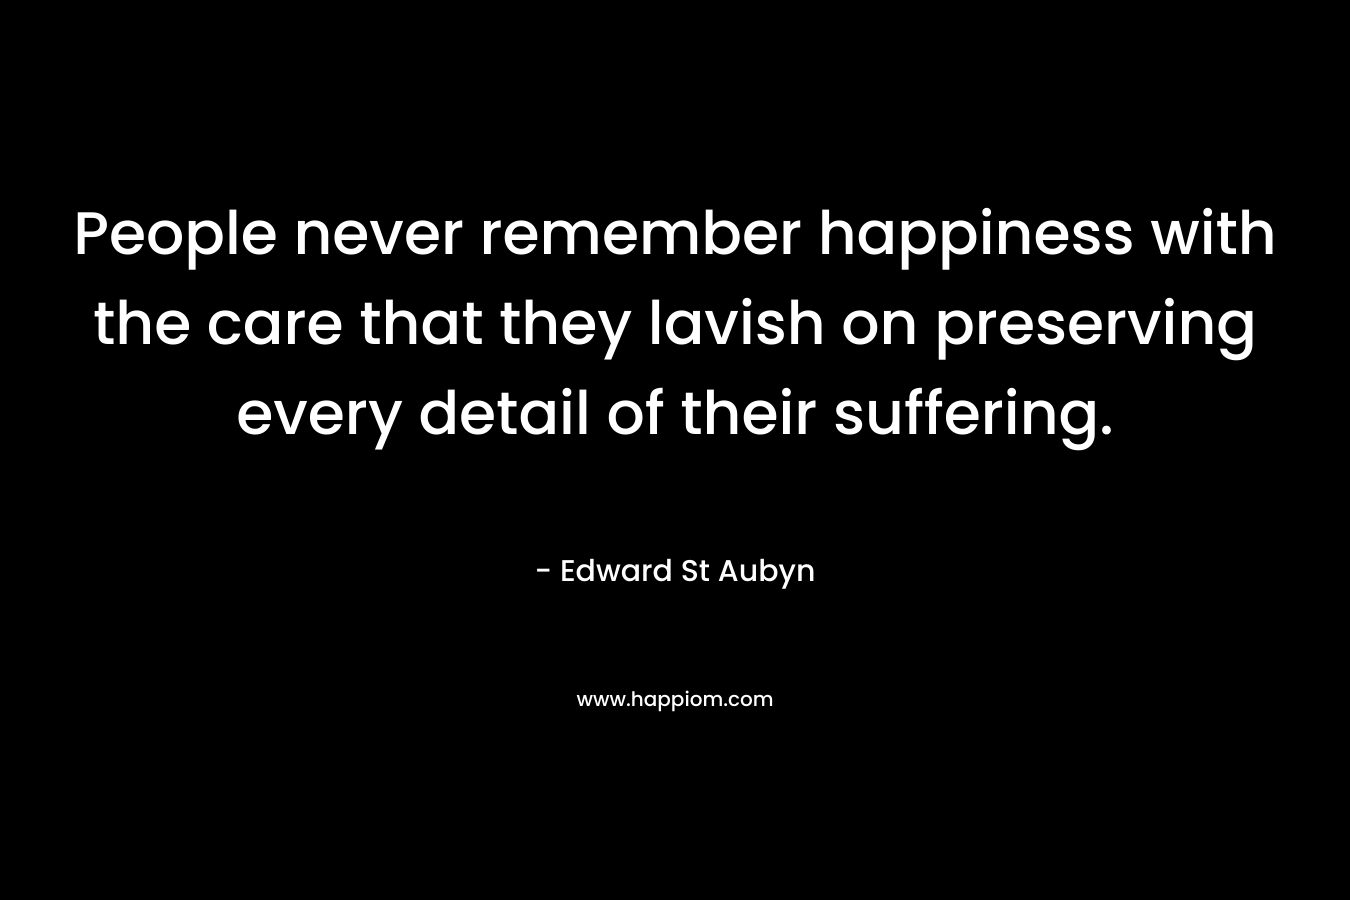 People never remember happiness with the care that they lavish on preserving every detail of their suffering. – Edward St Aubyn